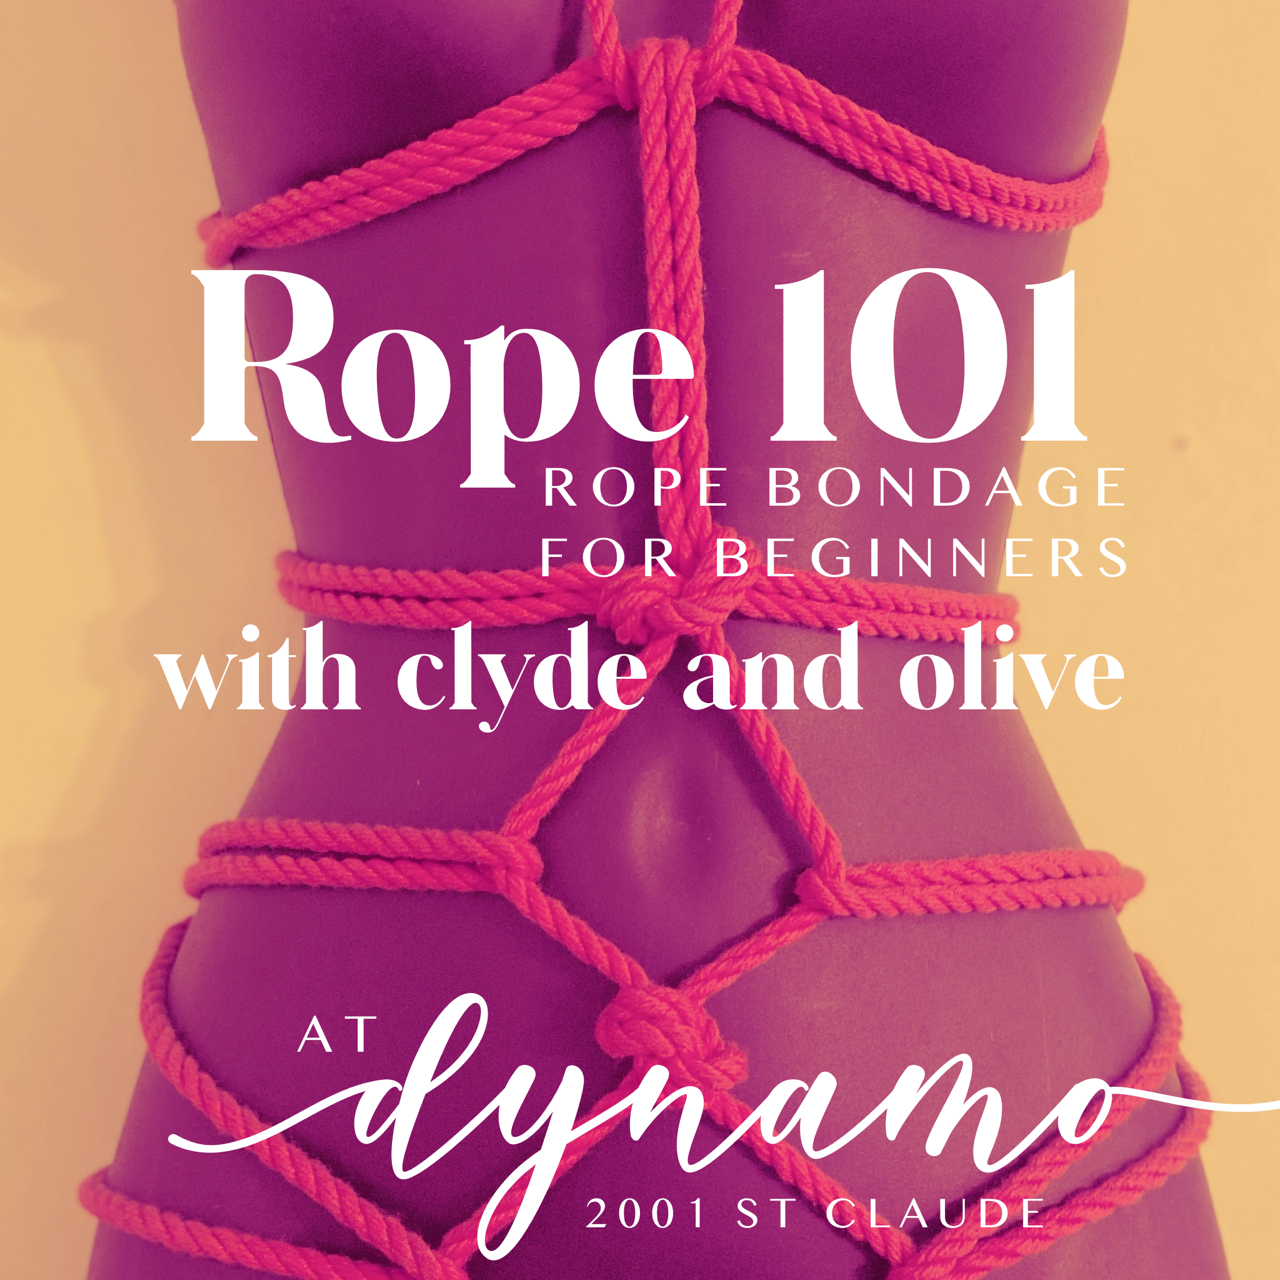 SOLD OUT: Rope 101 with Clyde and Olive